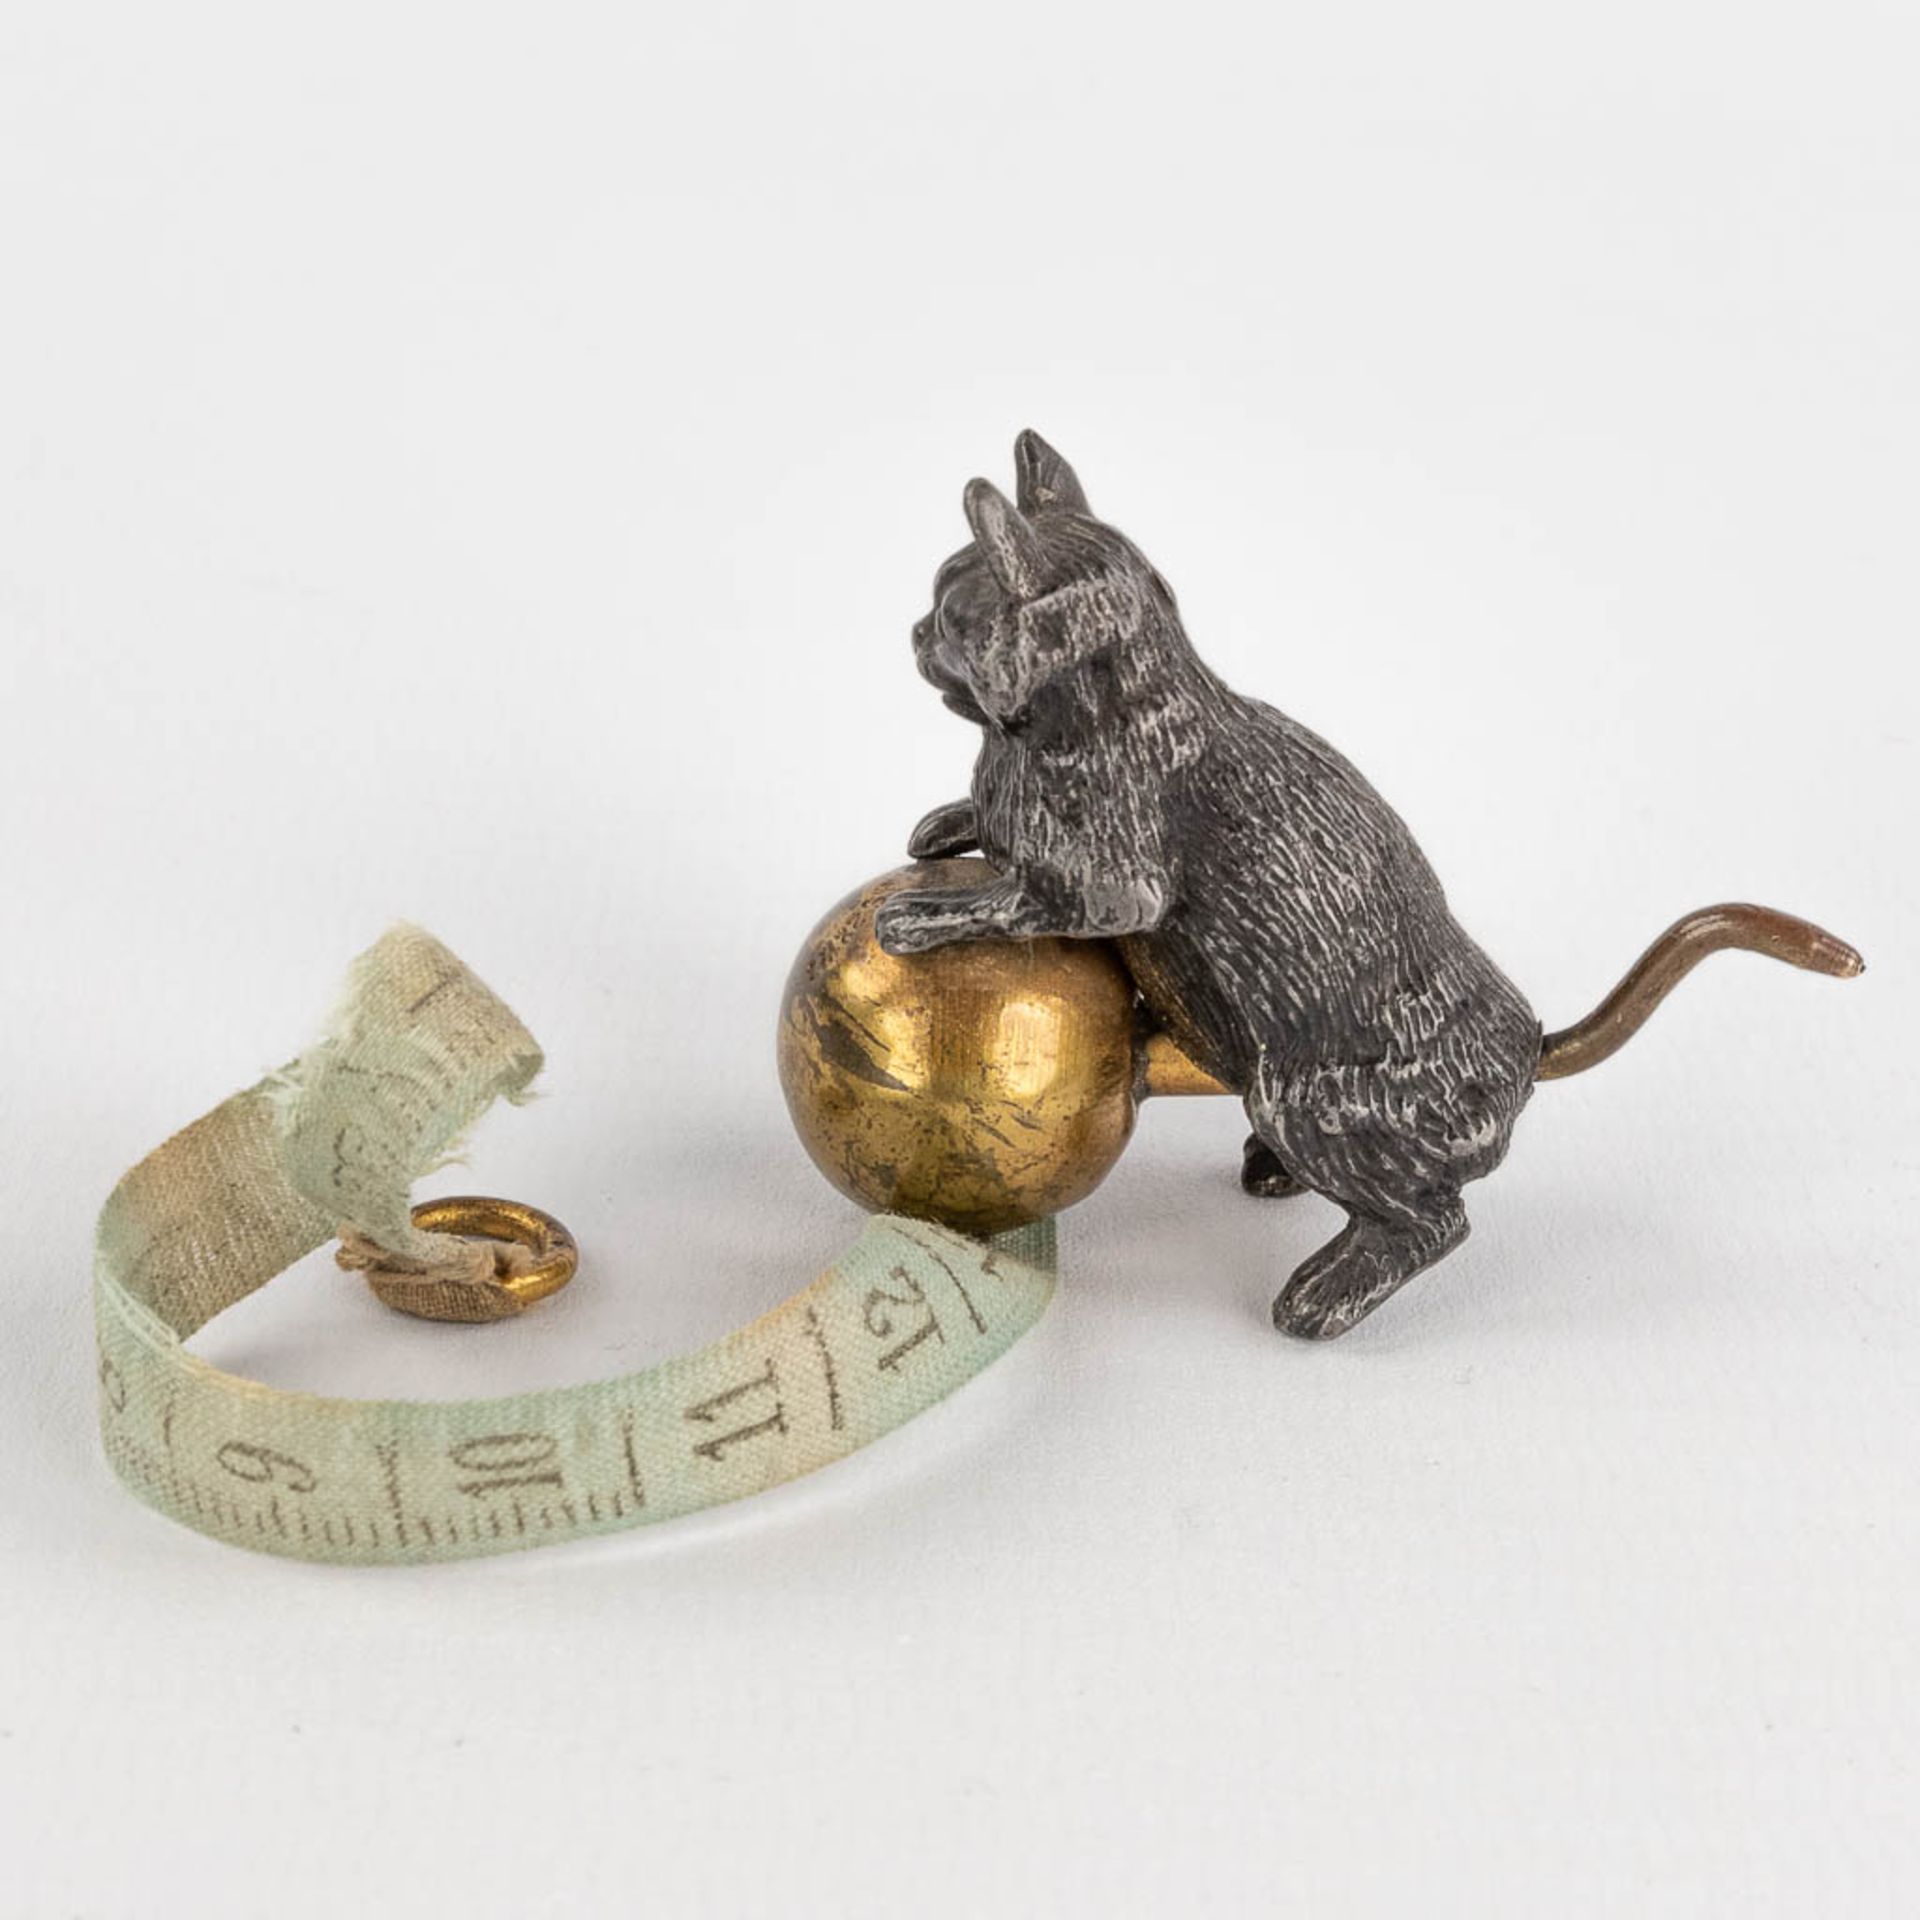 An antique tape measure, in the shape of a cat with a ball, Vienna bronze. 19th century. (H: 4,2 cm) - Image 17 of 18